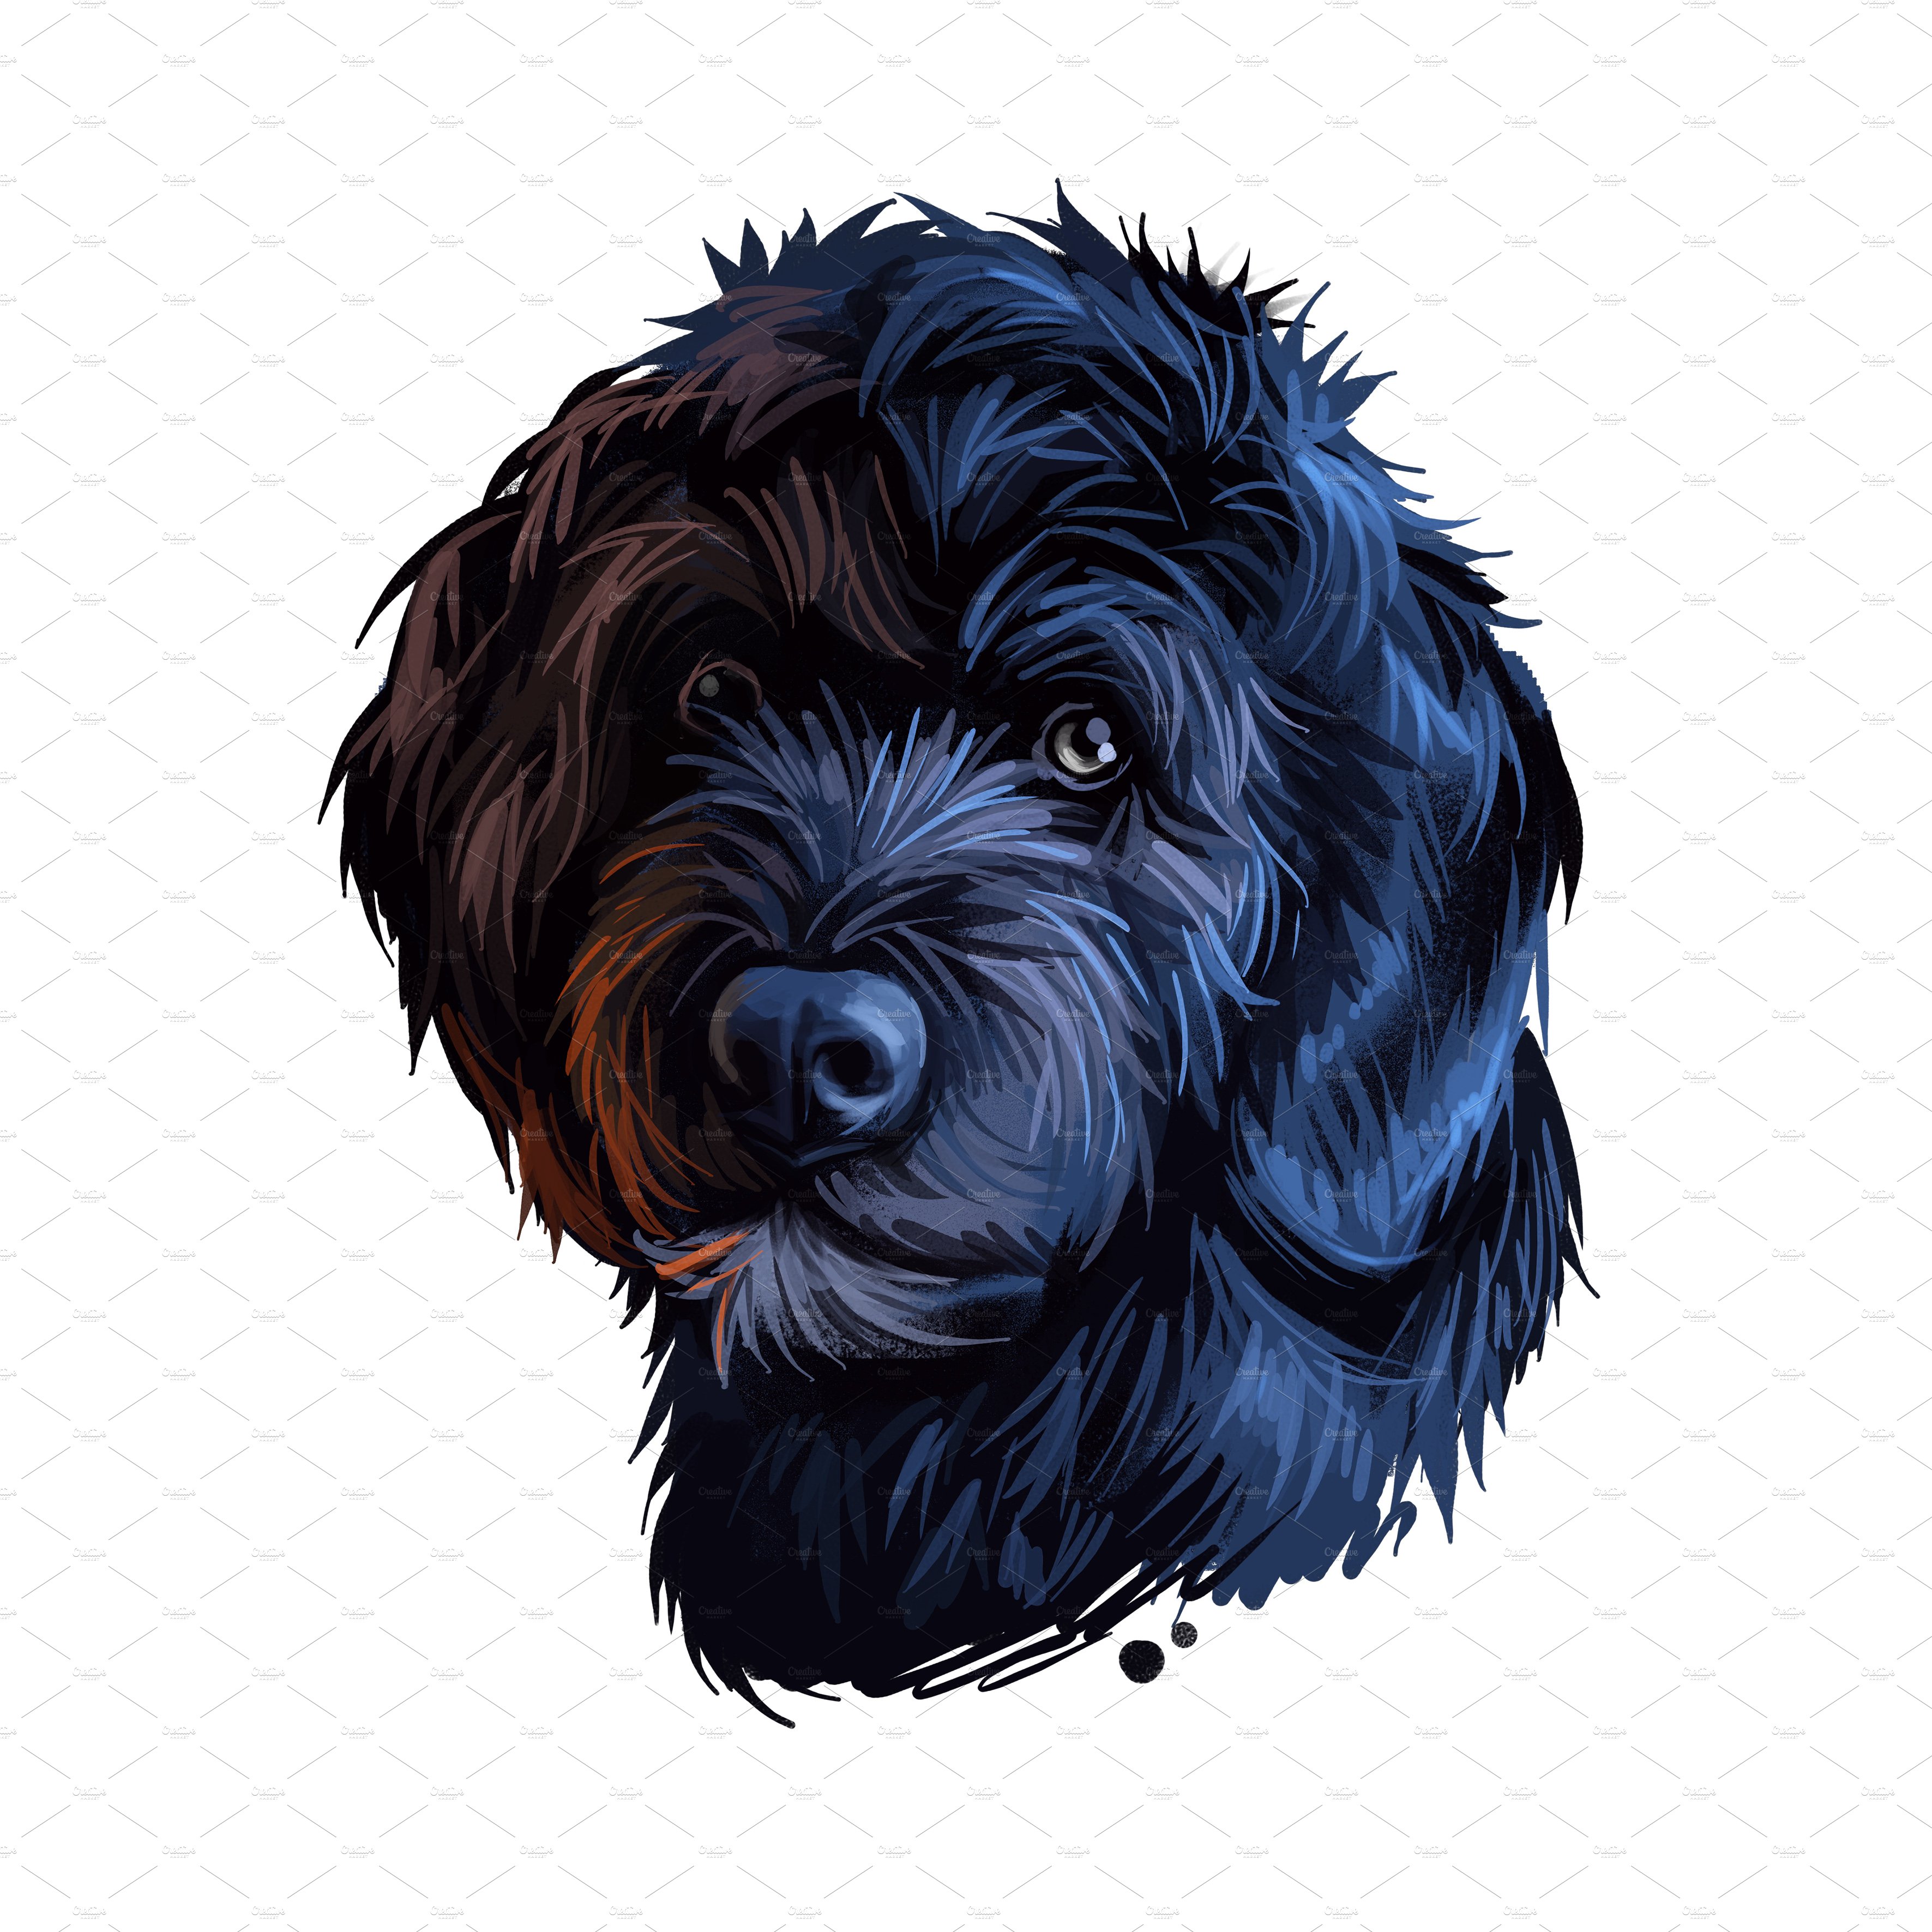 43. portuguese water dog 28129 43